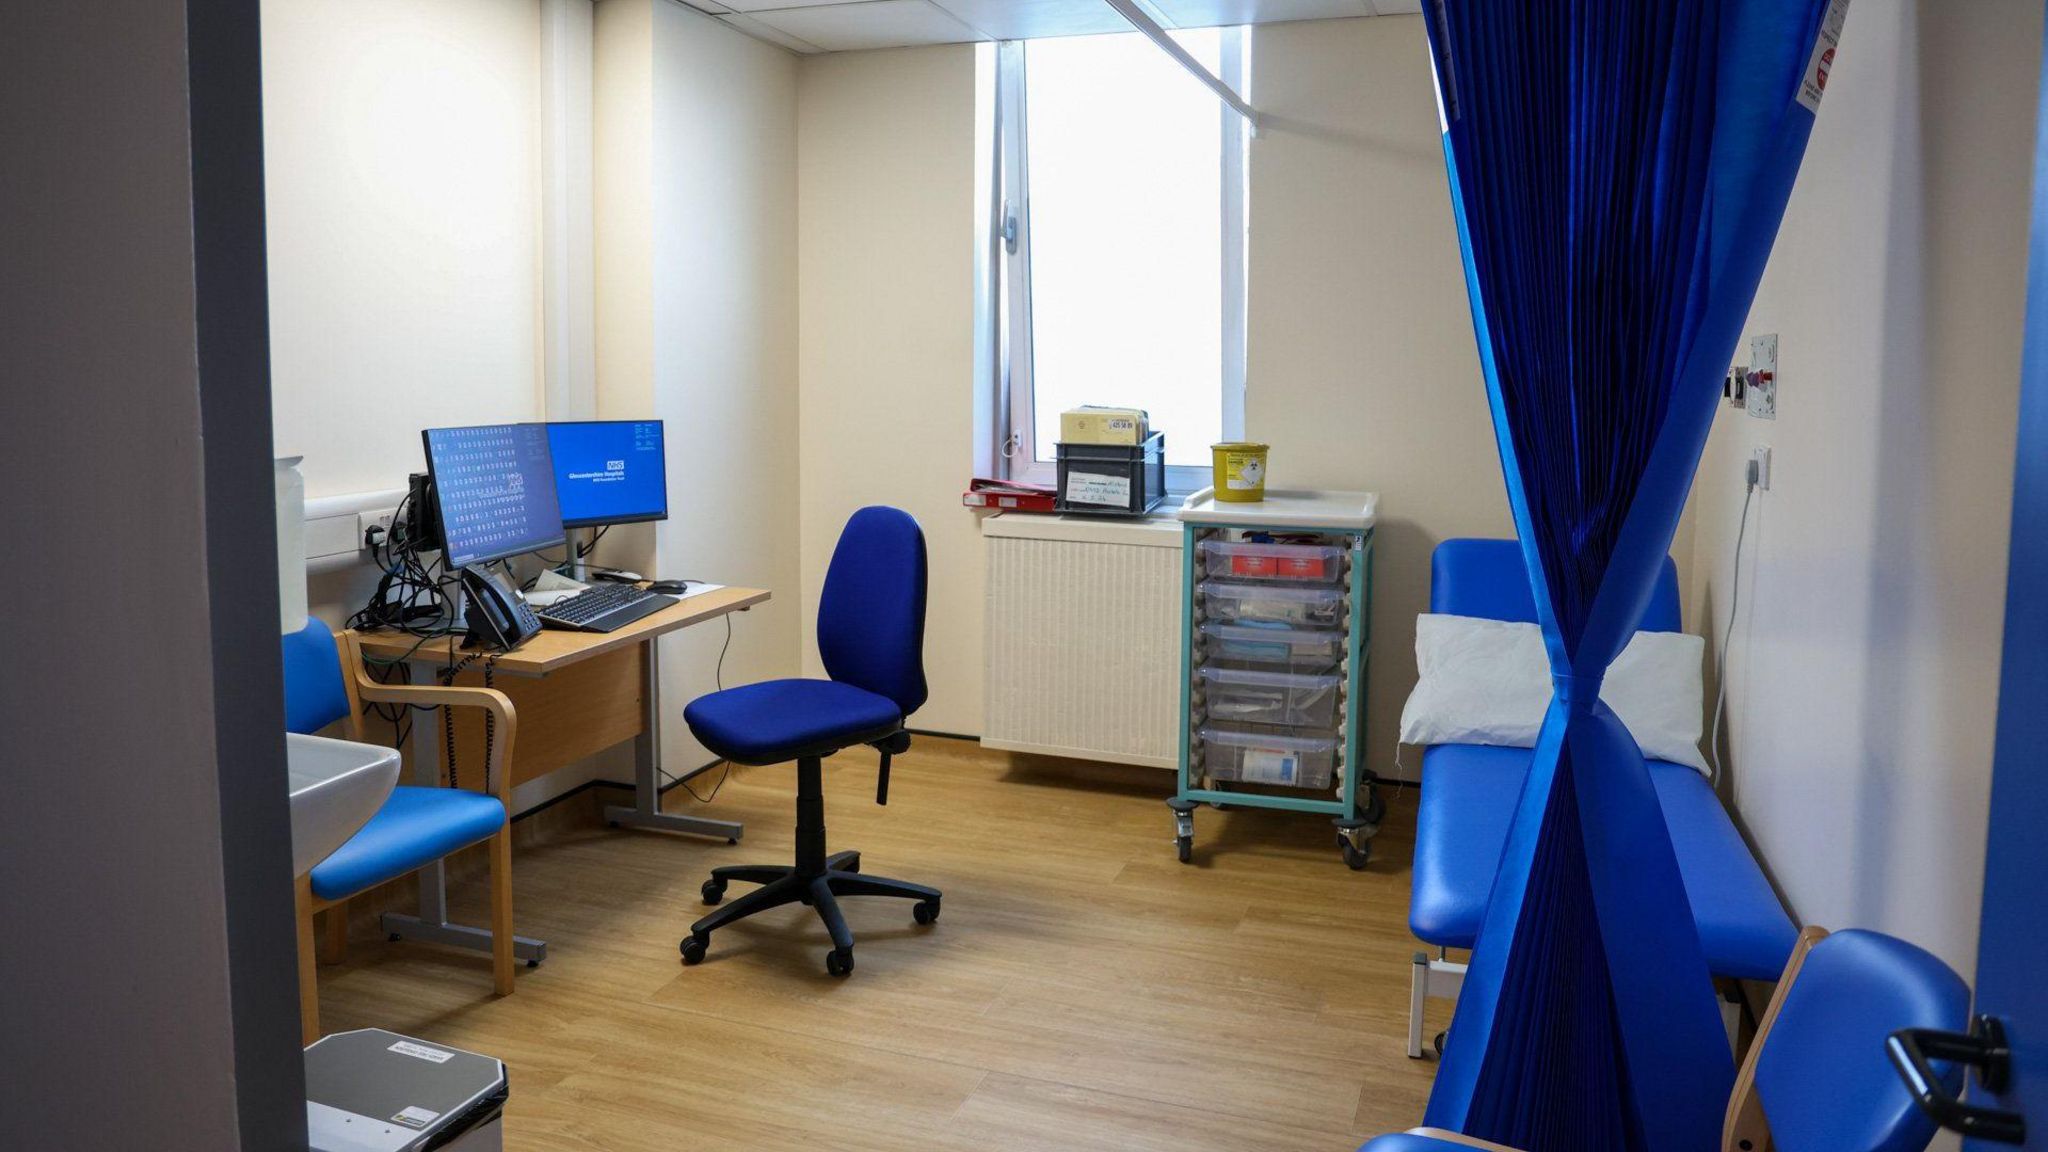 A room in a clinic in a hospital with curtains around a bed